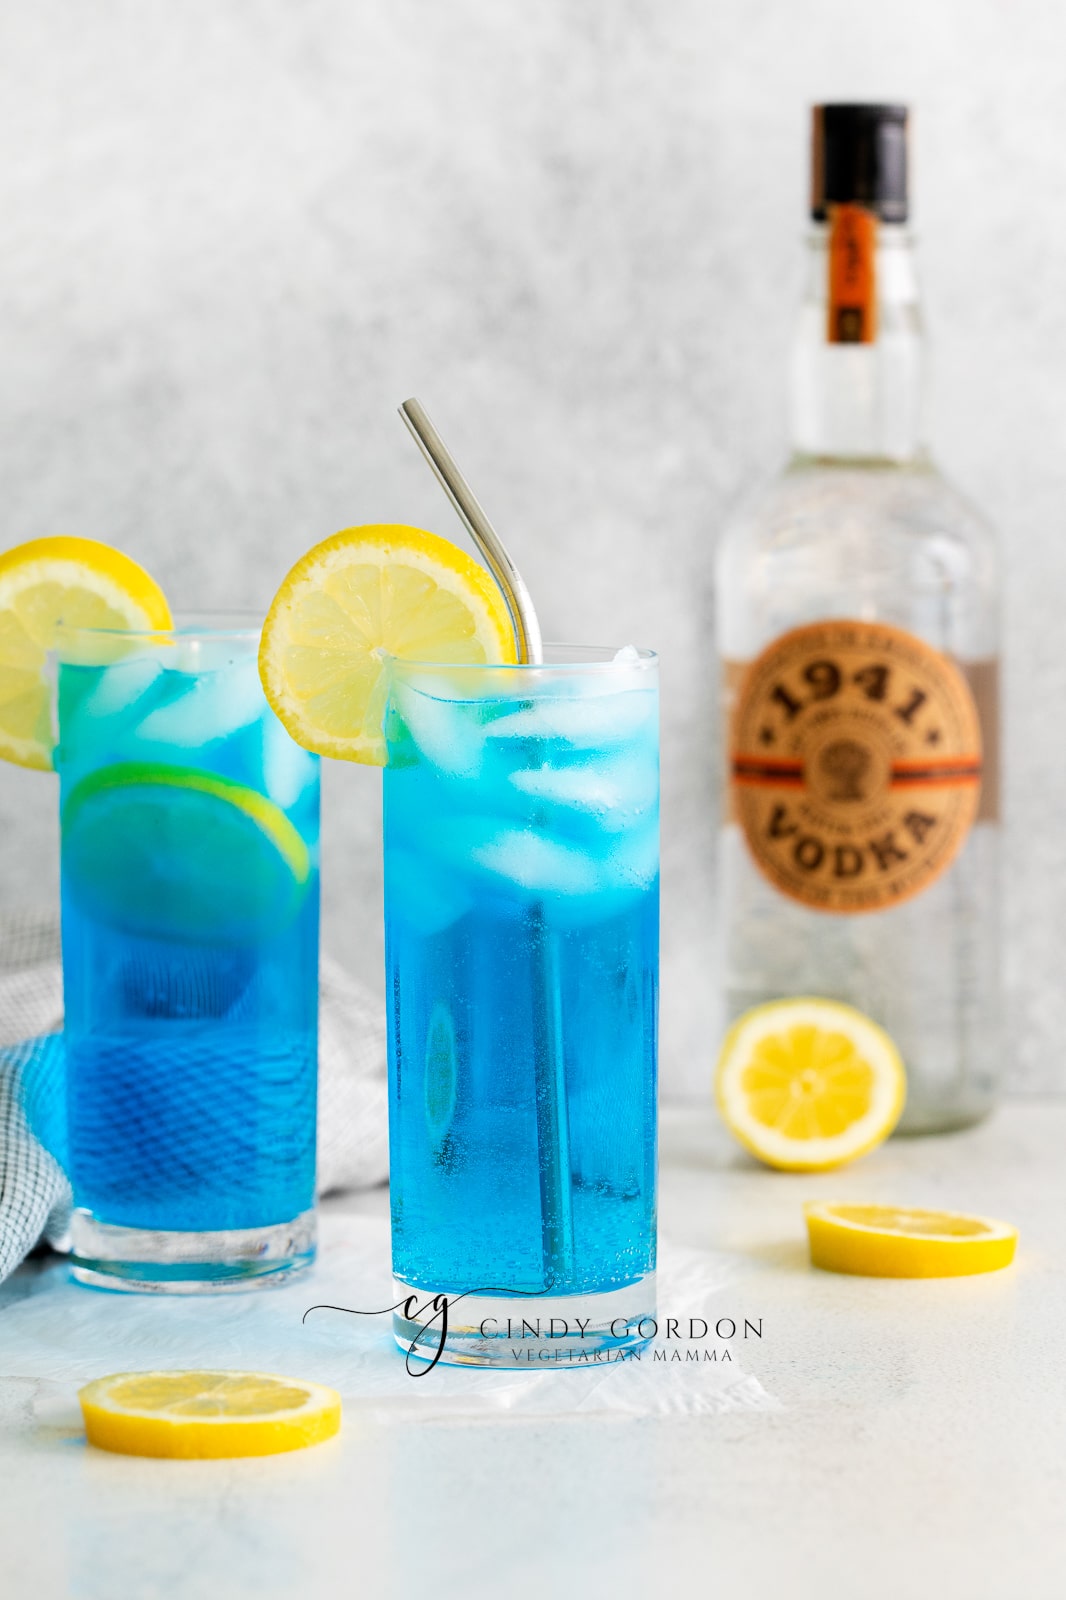 two clear tall glasses filled with ice and a blue liquid, topped with lemon slices, lemon slices also on counter, vodka bottle in back and towel to left side